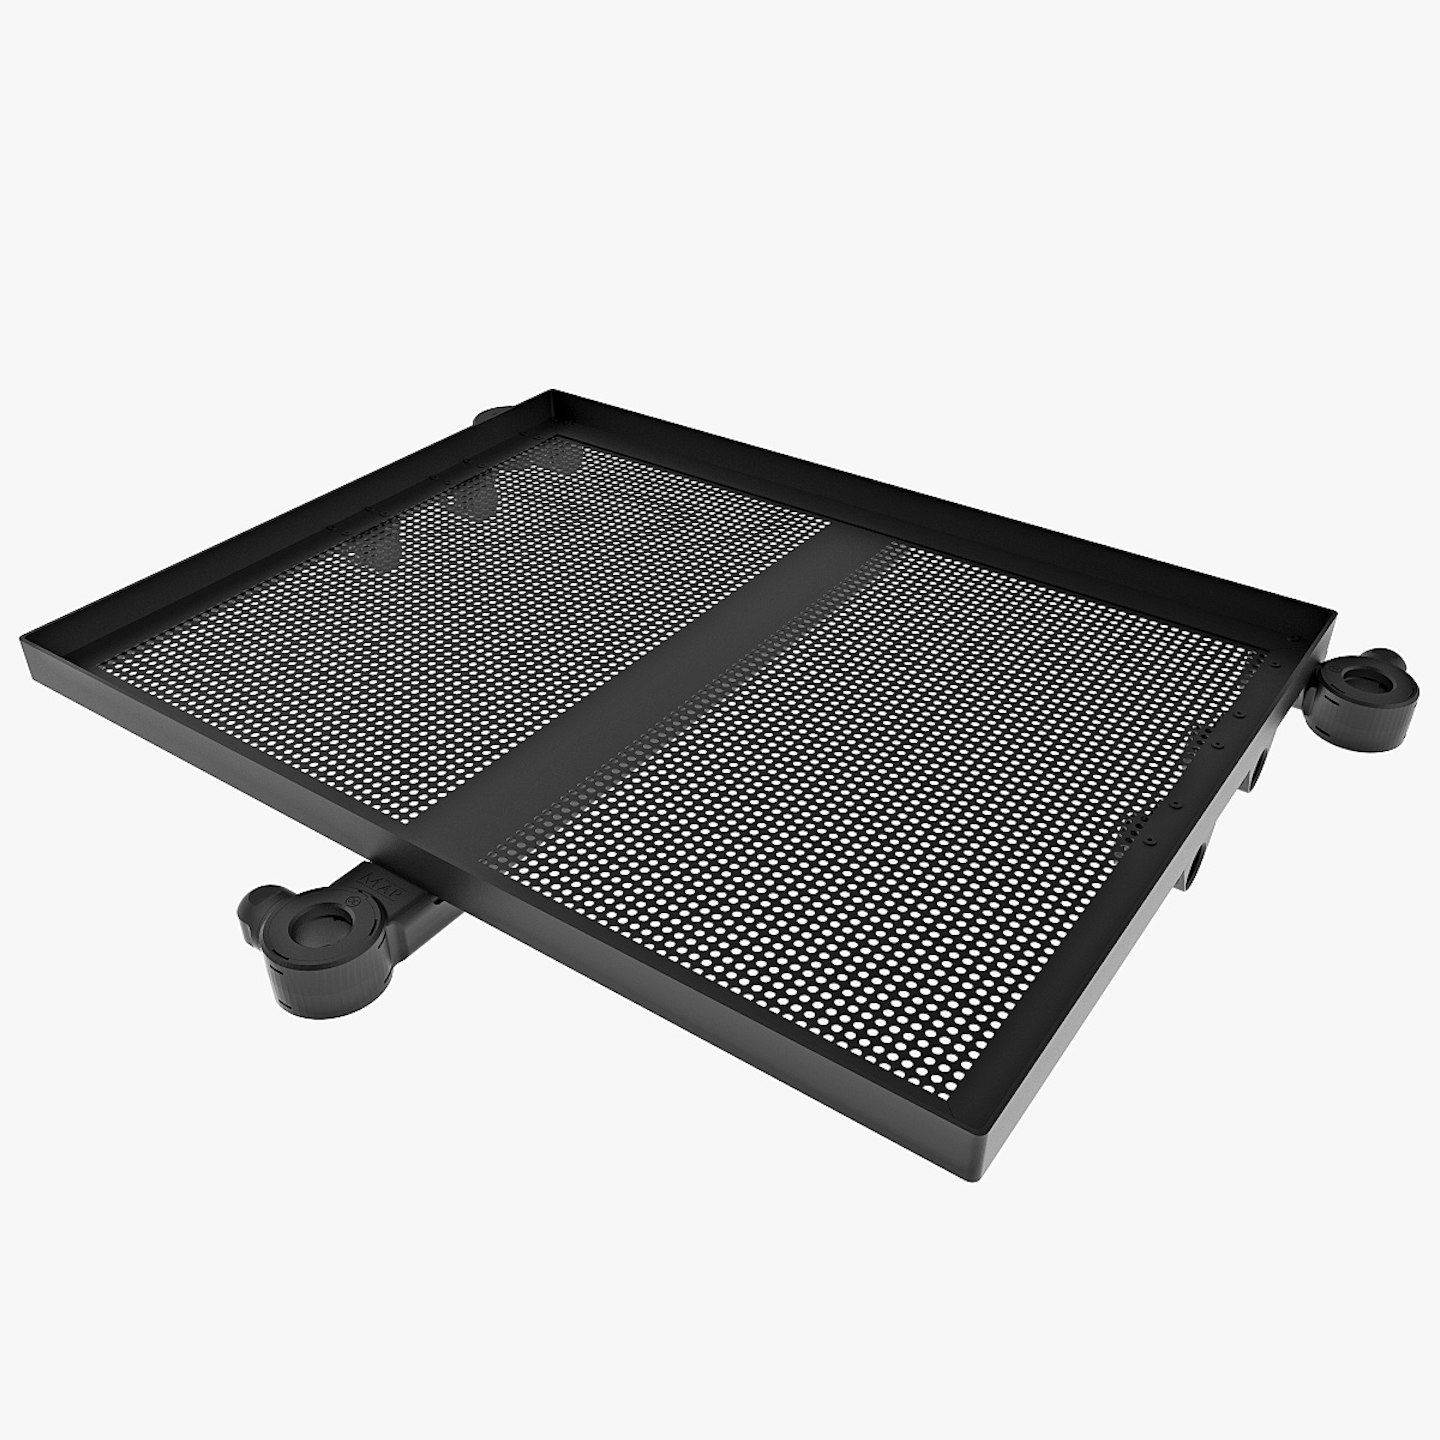 The best side trays review